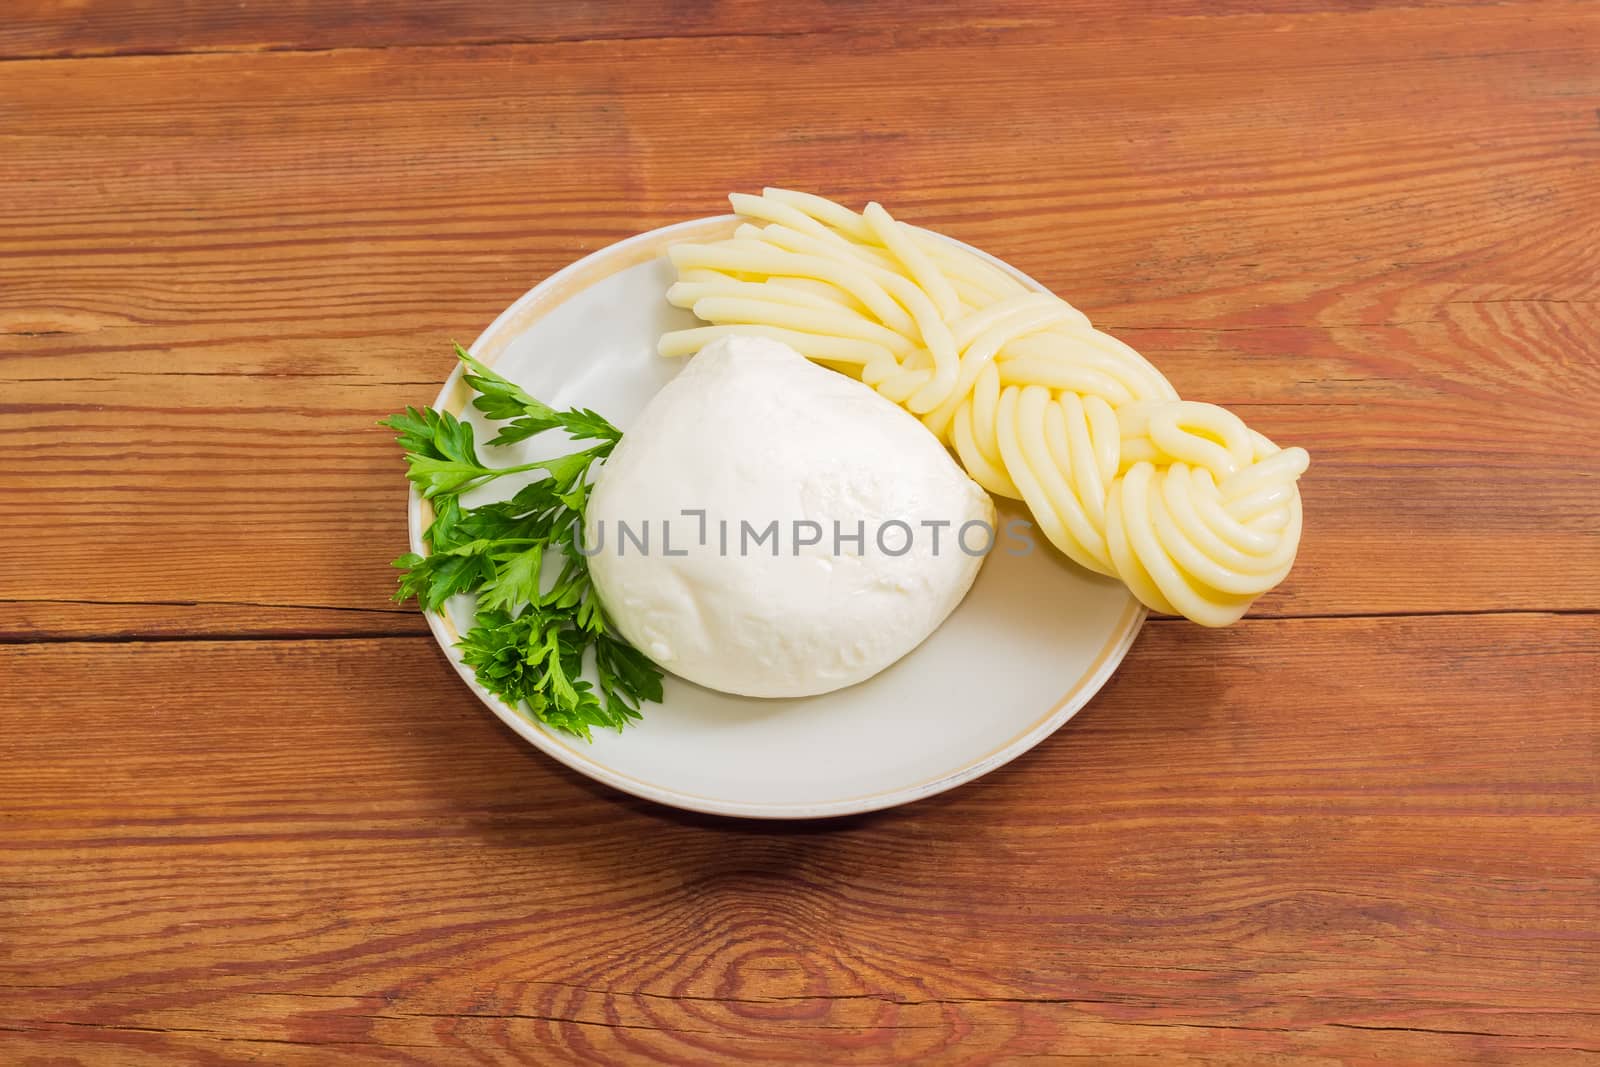 Ball of the fresh mozzarella cheese, portion of the mozzarella cheese in the shape of strings, twisted to form a plait and twig of parsley on the saucer on an old wooden surface
